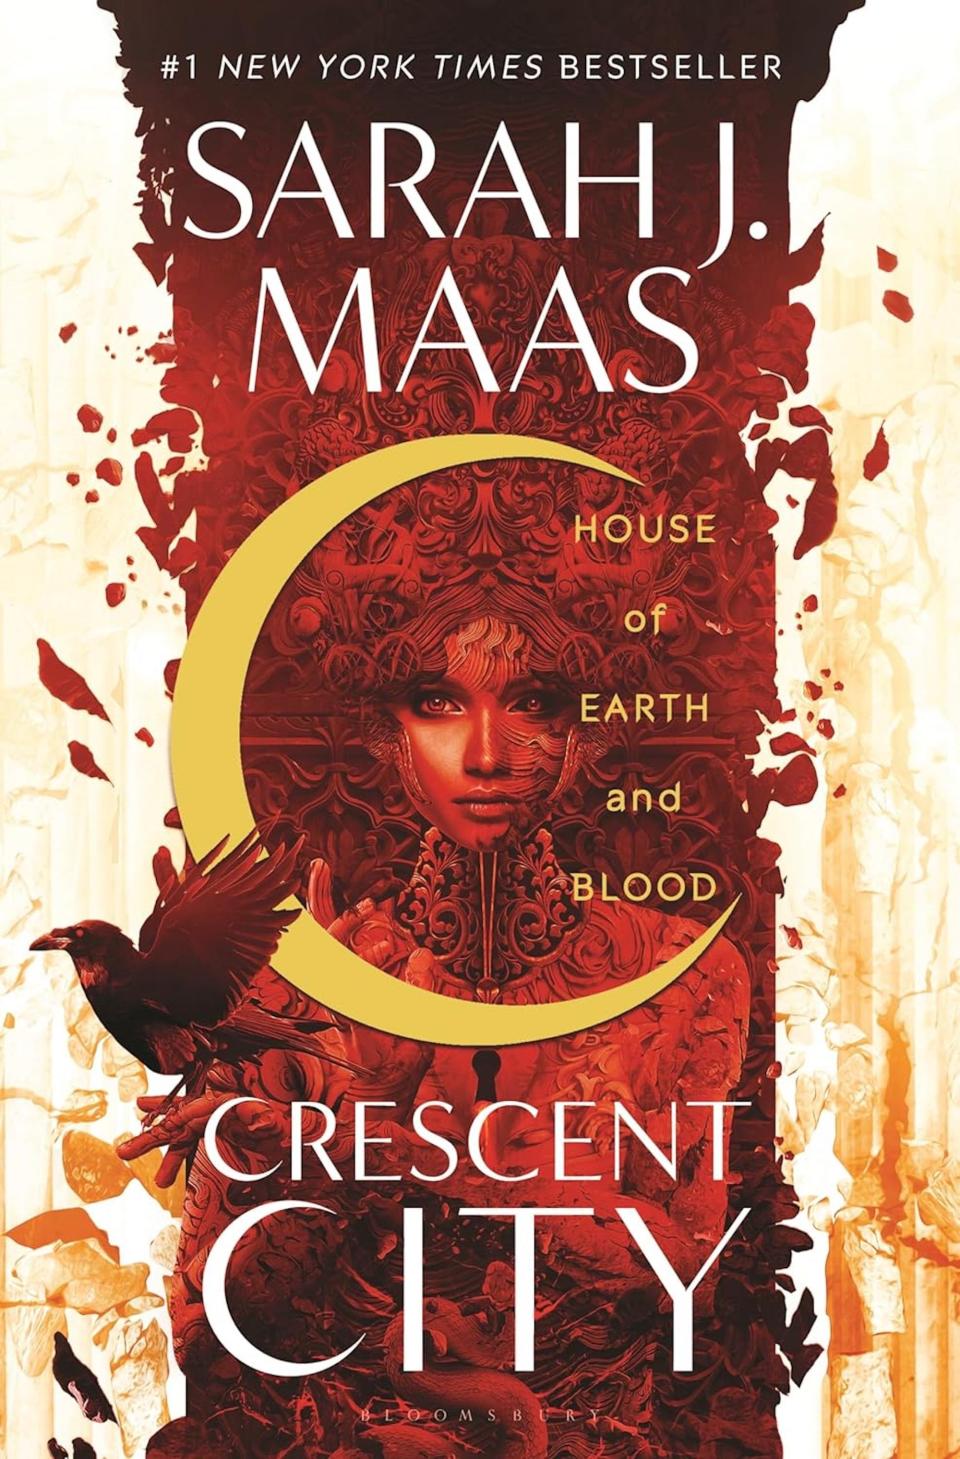 The cover of "House of Earth and Blood" by Sarah J. Maas.